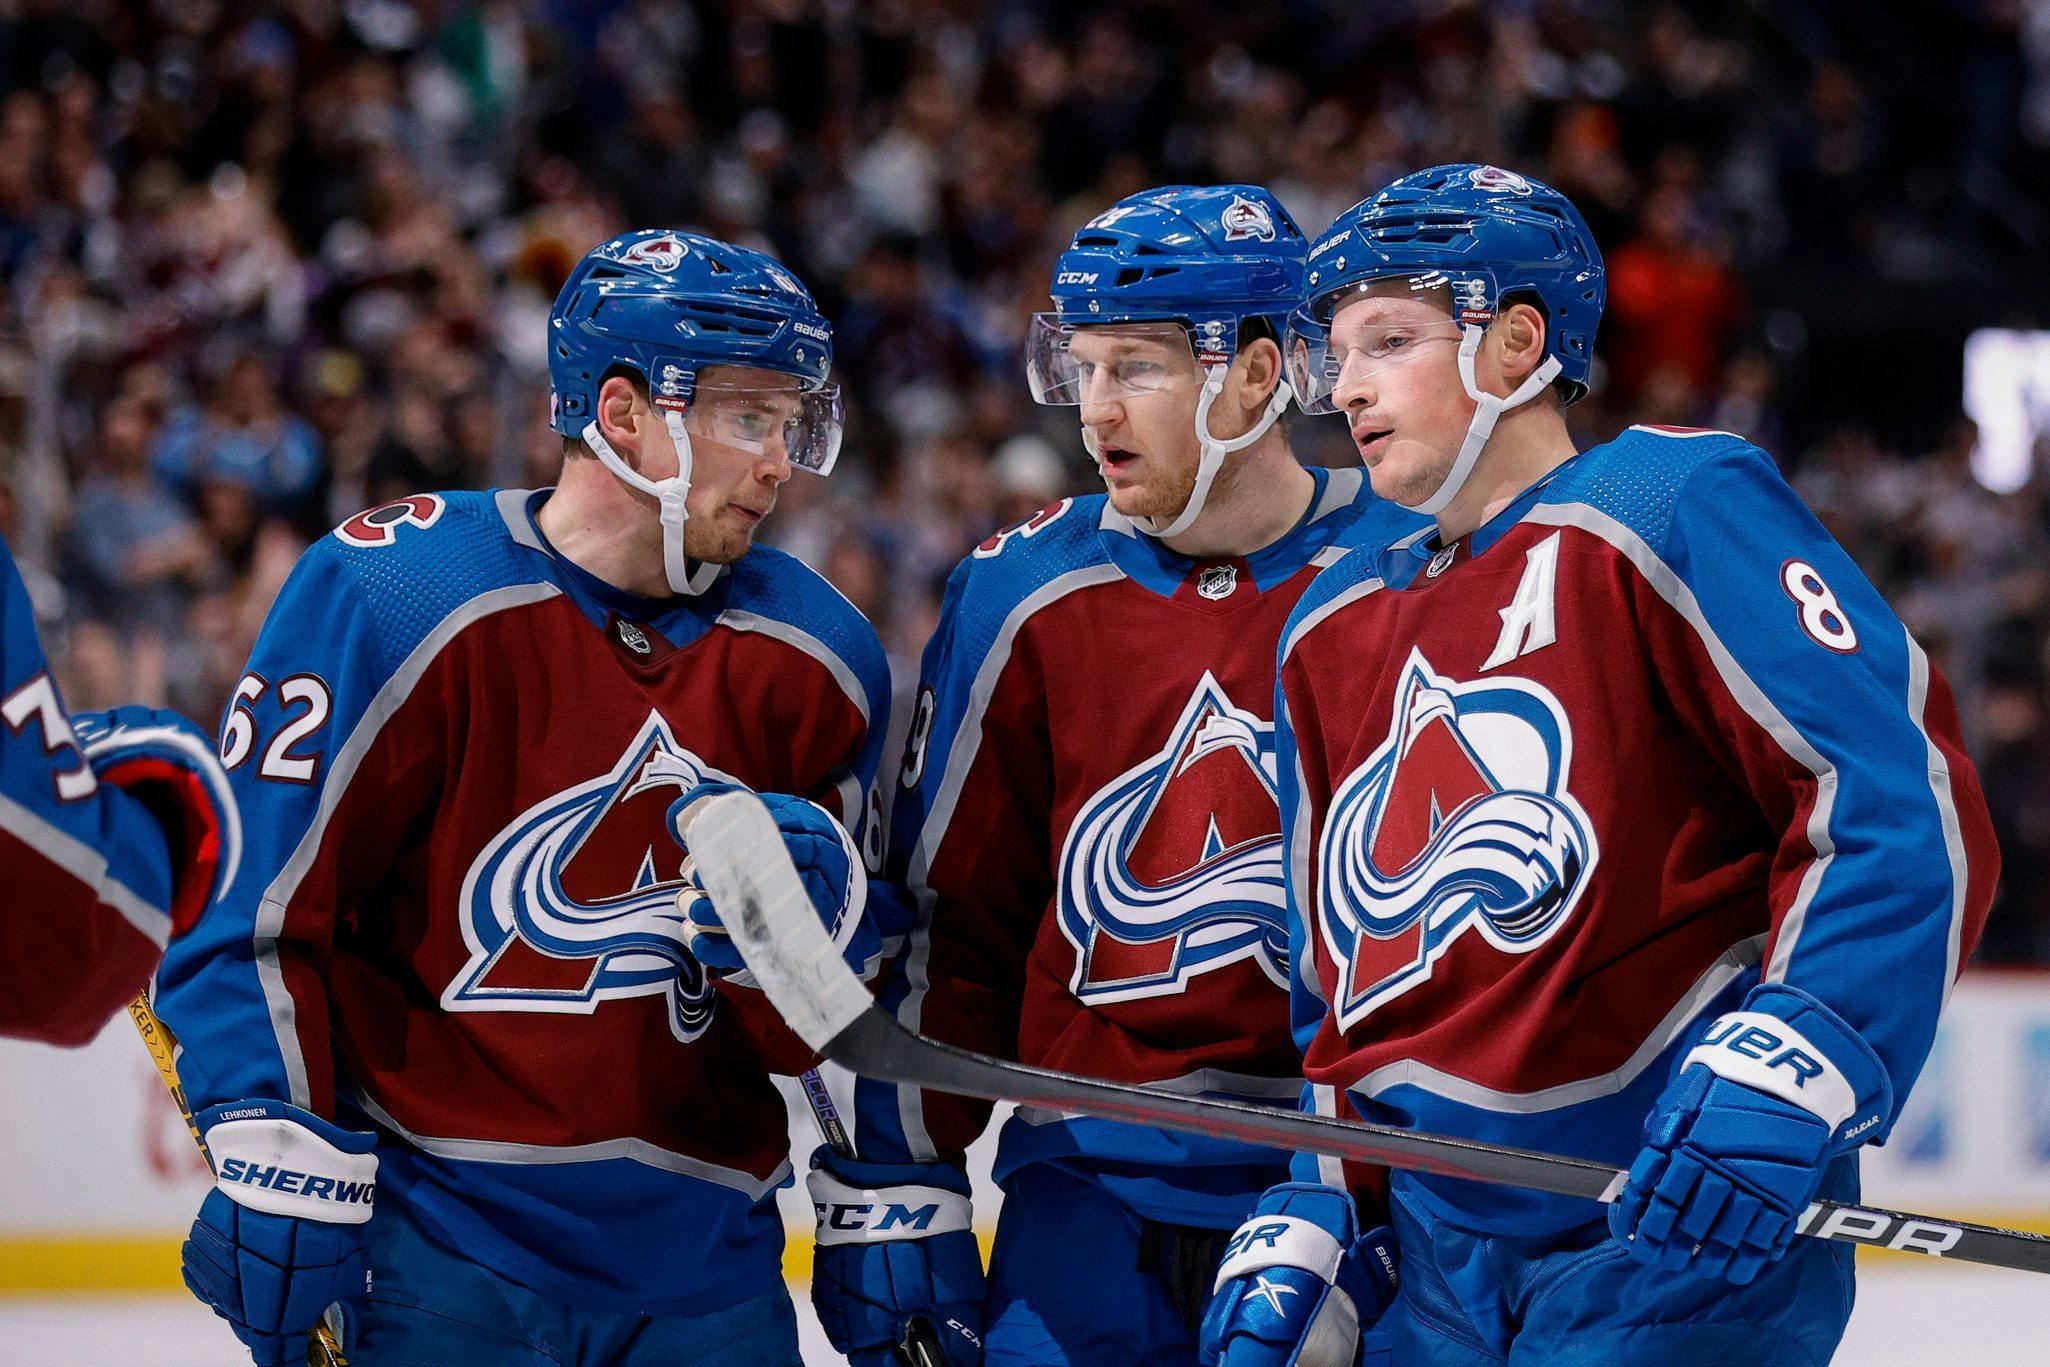 Avs Valeri Nichushkin is ready to move on from his playoff absence la